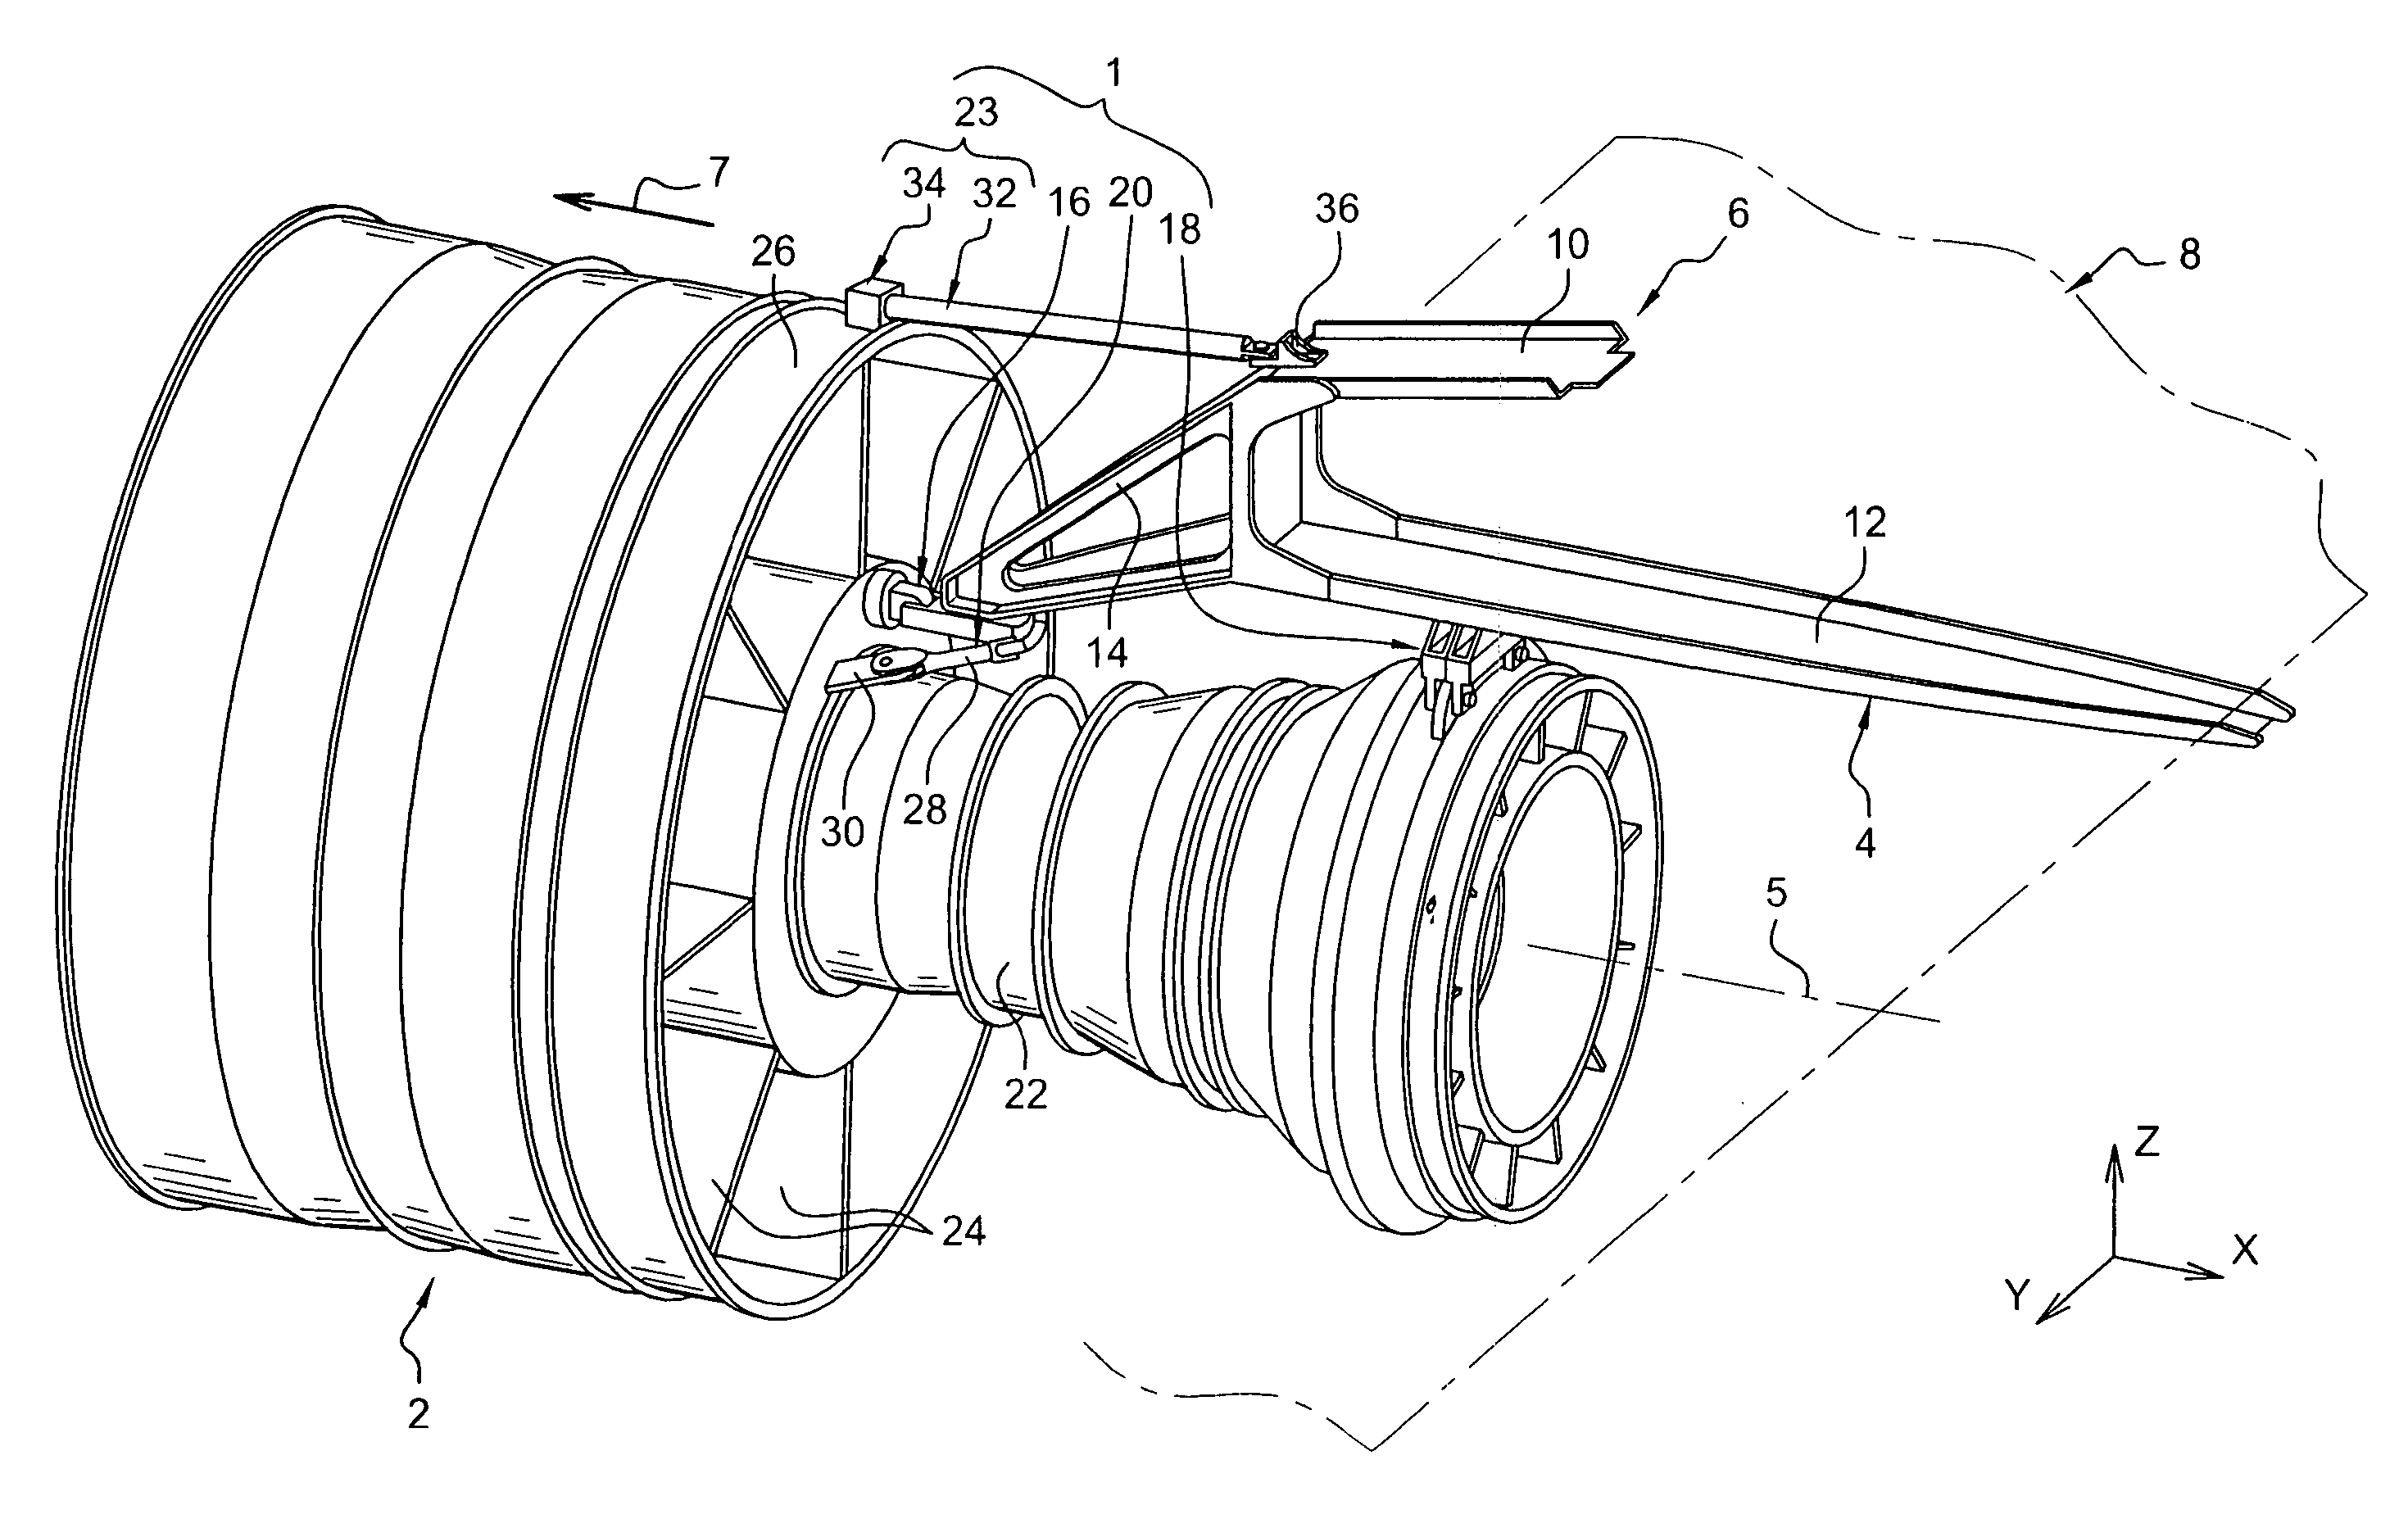 Mounting system inserted between an aircraft engine and a rigid structure of an attachment strut fixed under a wing of this aircraft